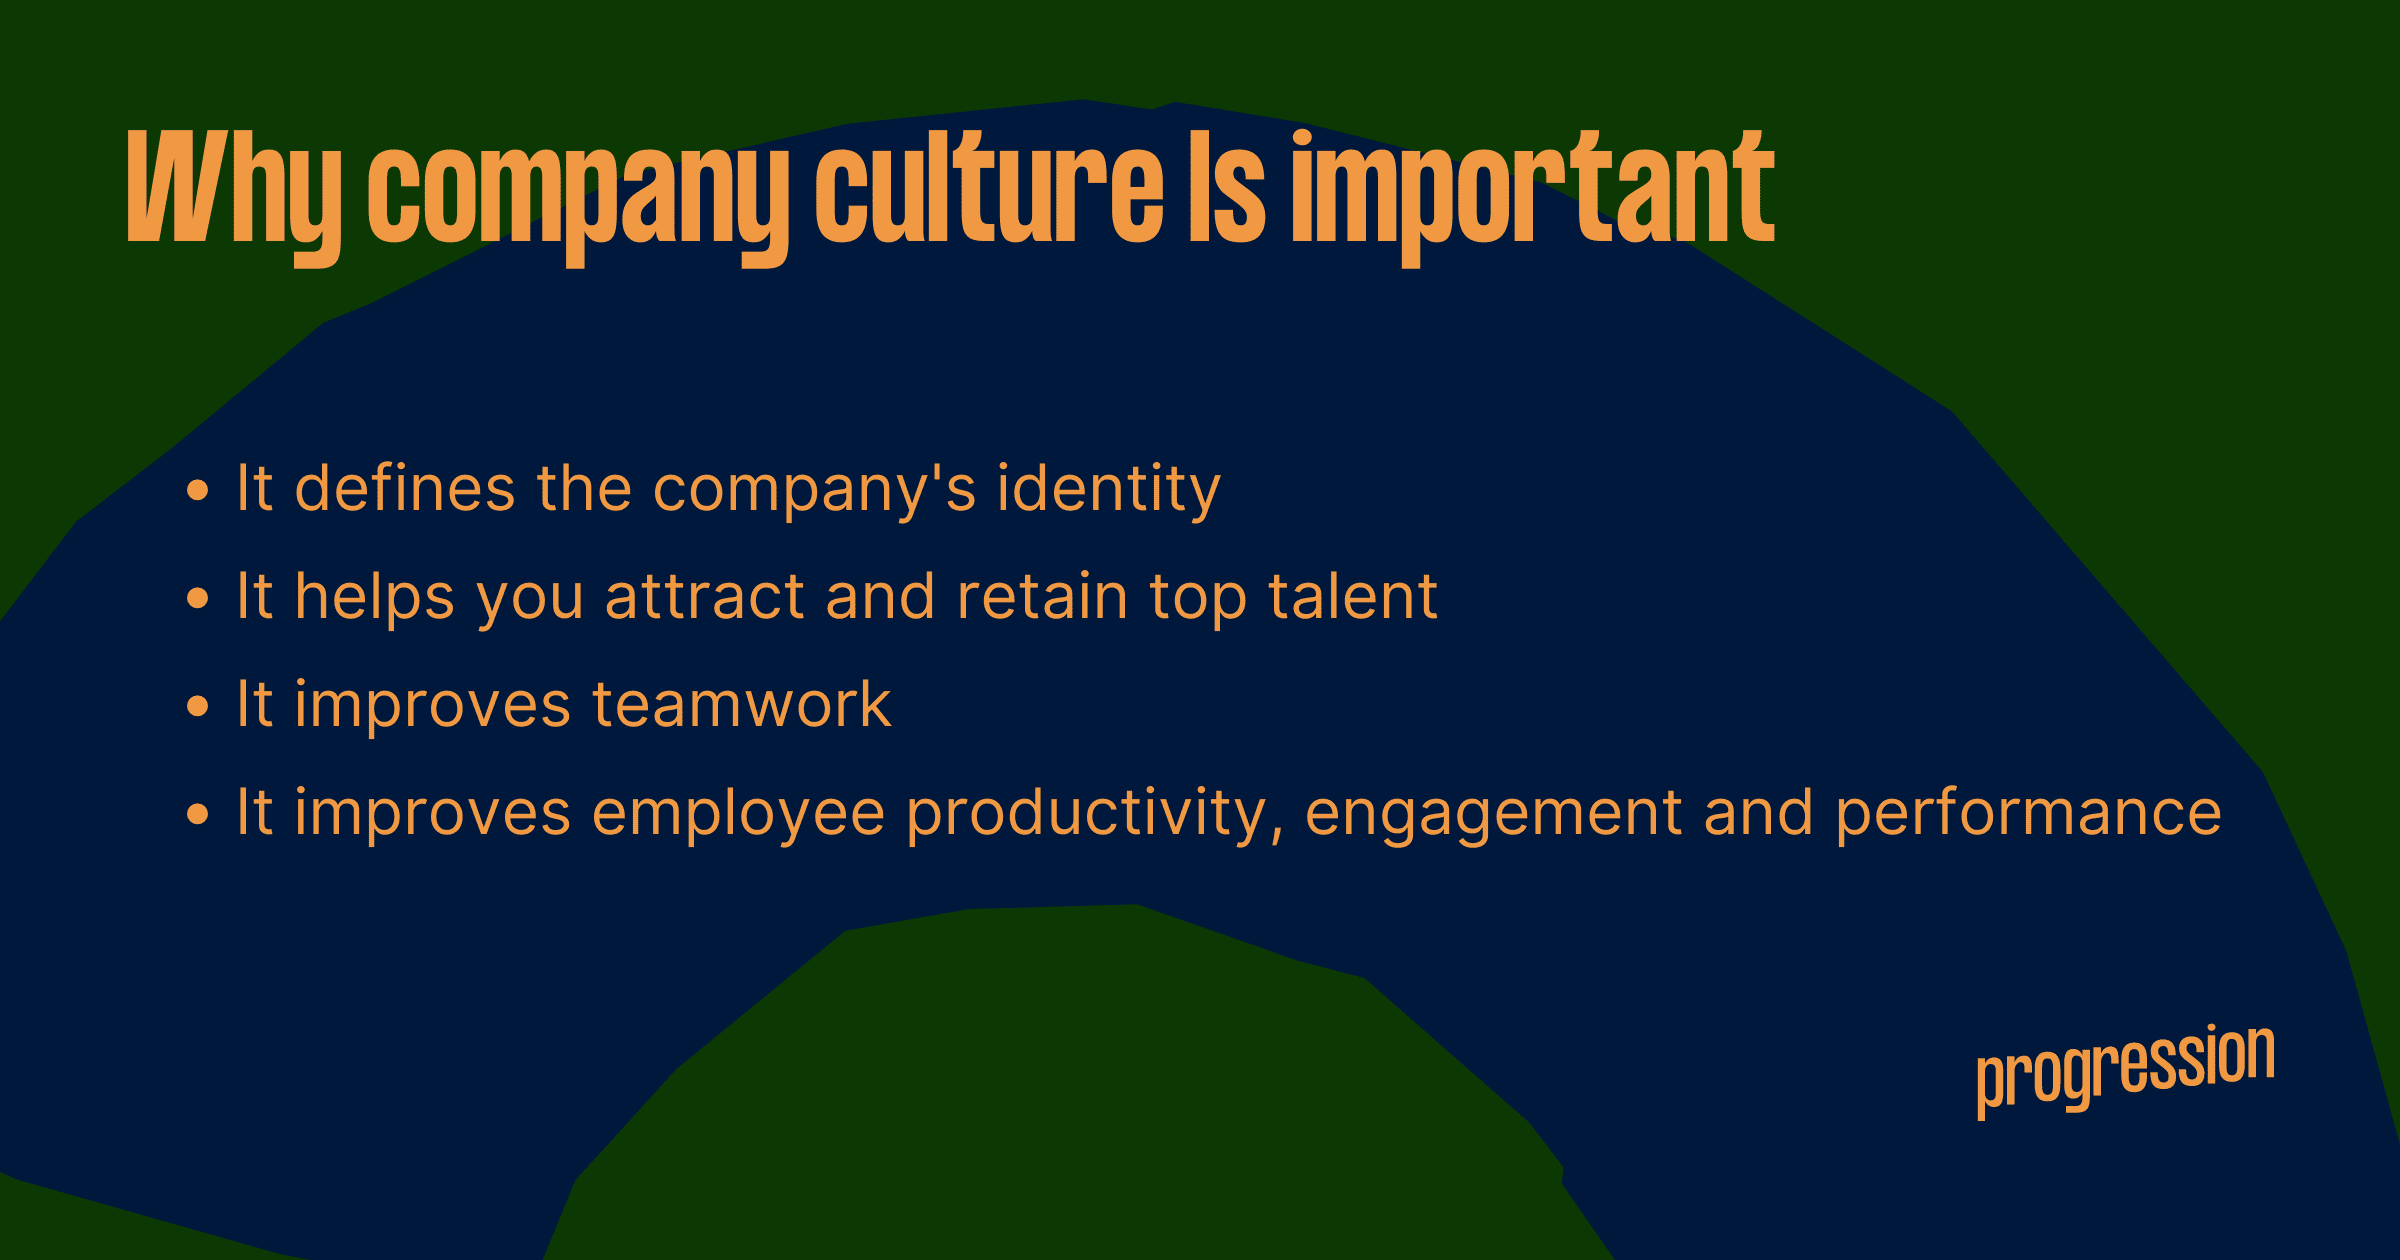 Graphic showing the importance of company culture